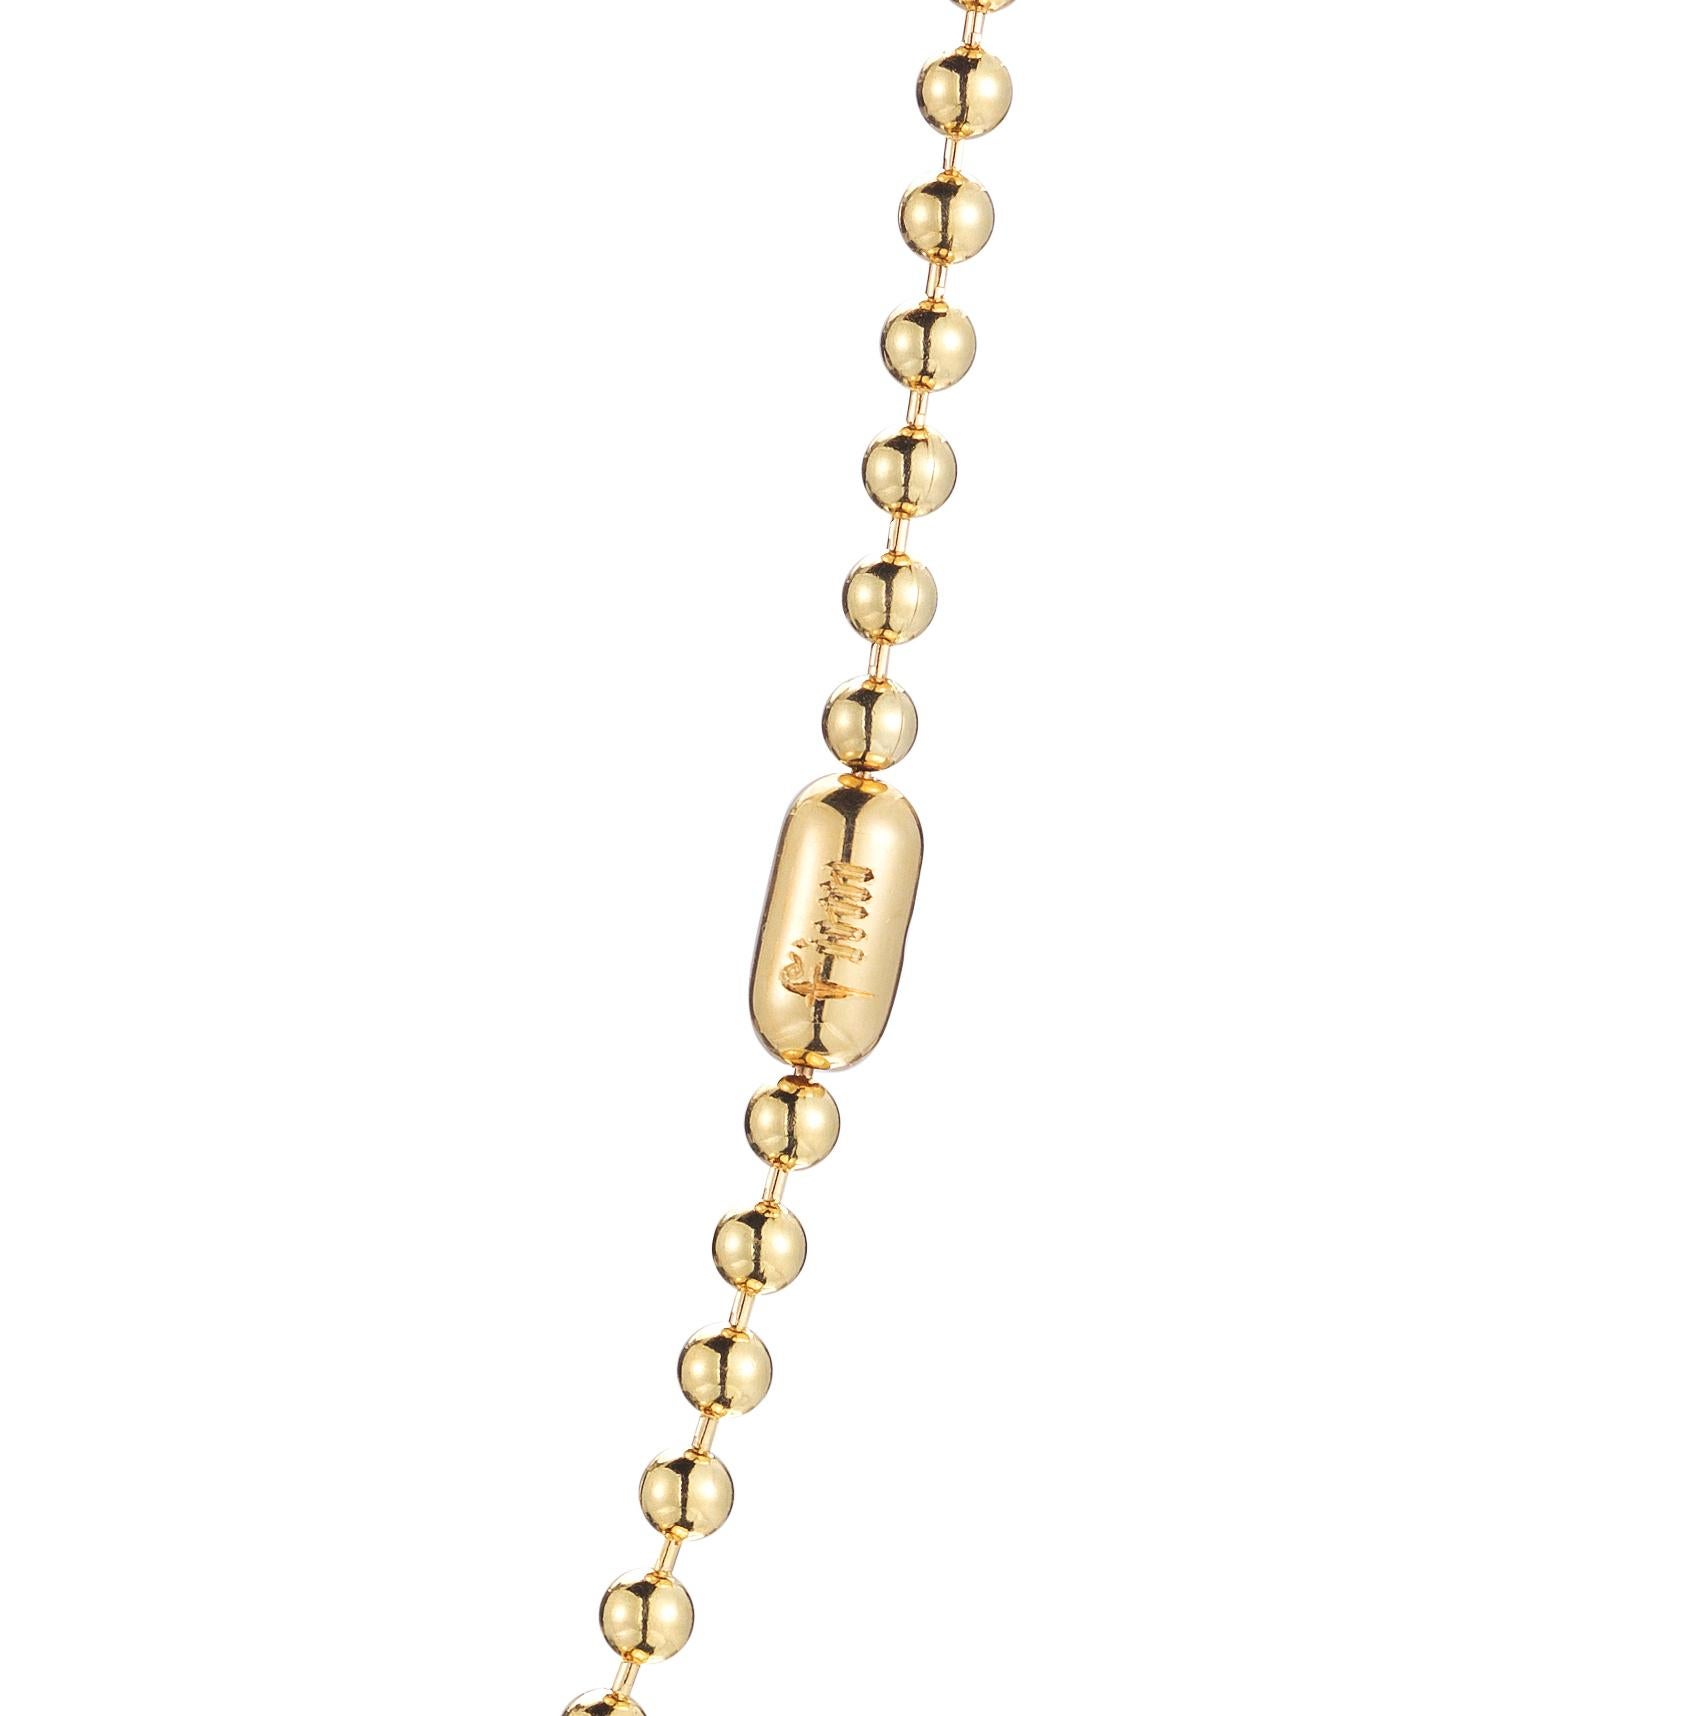 This isn't the ball chain jewelry you remember. Here is a grown up version in solid gold. The best part is the traditional capsule closure with a hand engraved 